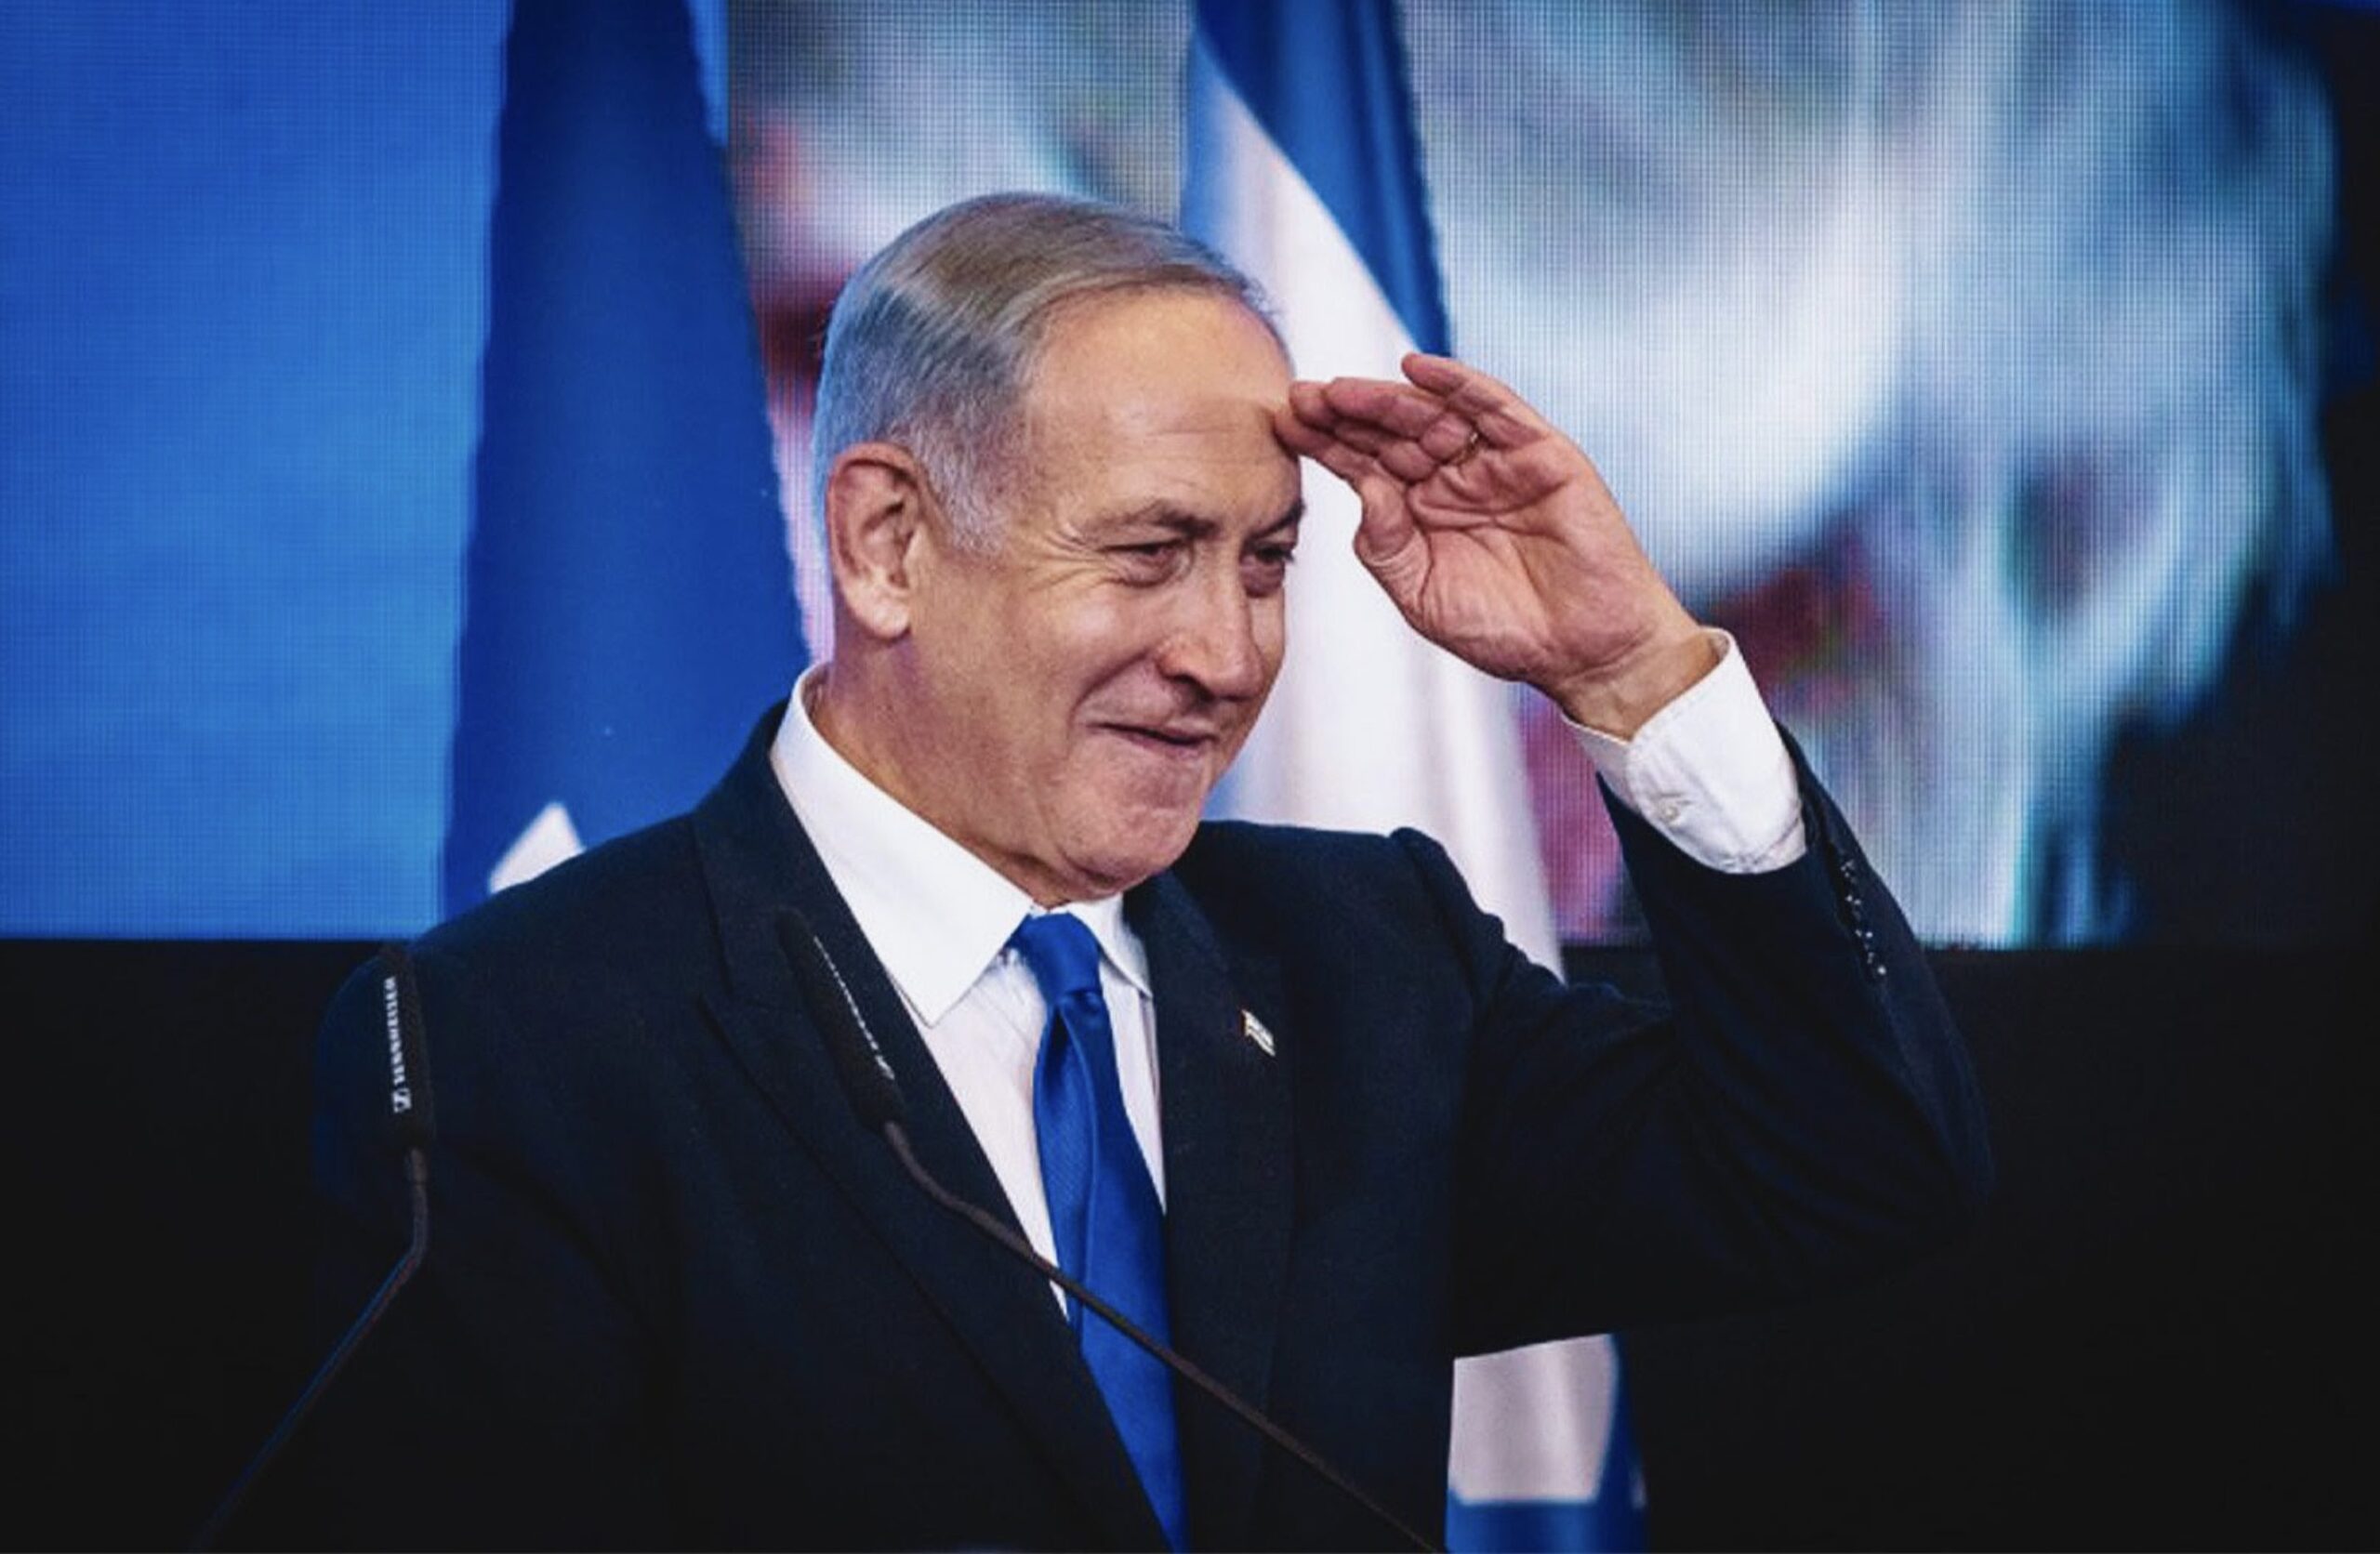 Netanyahu Rushed to Hospital After Losing Consciousness